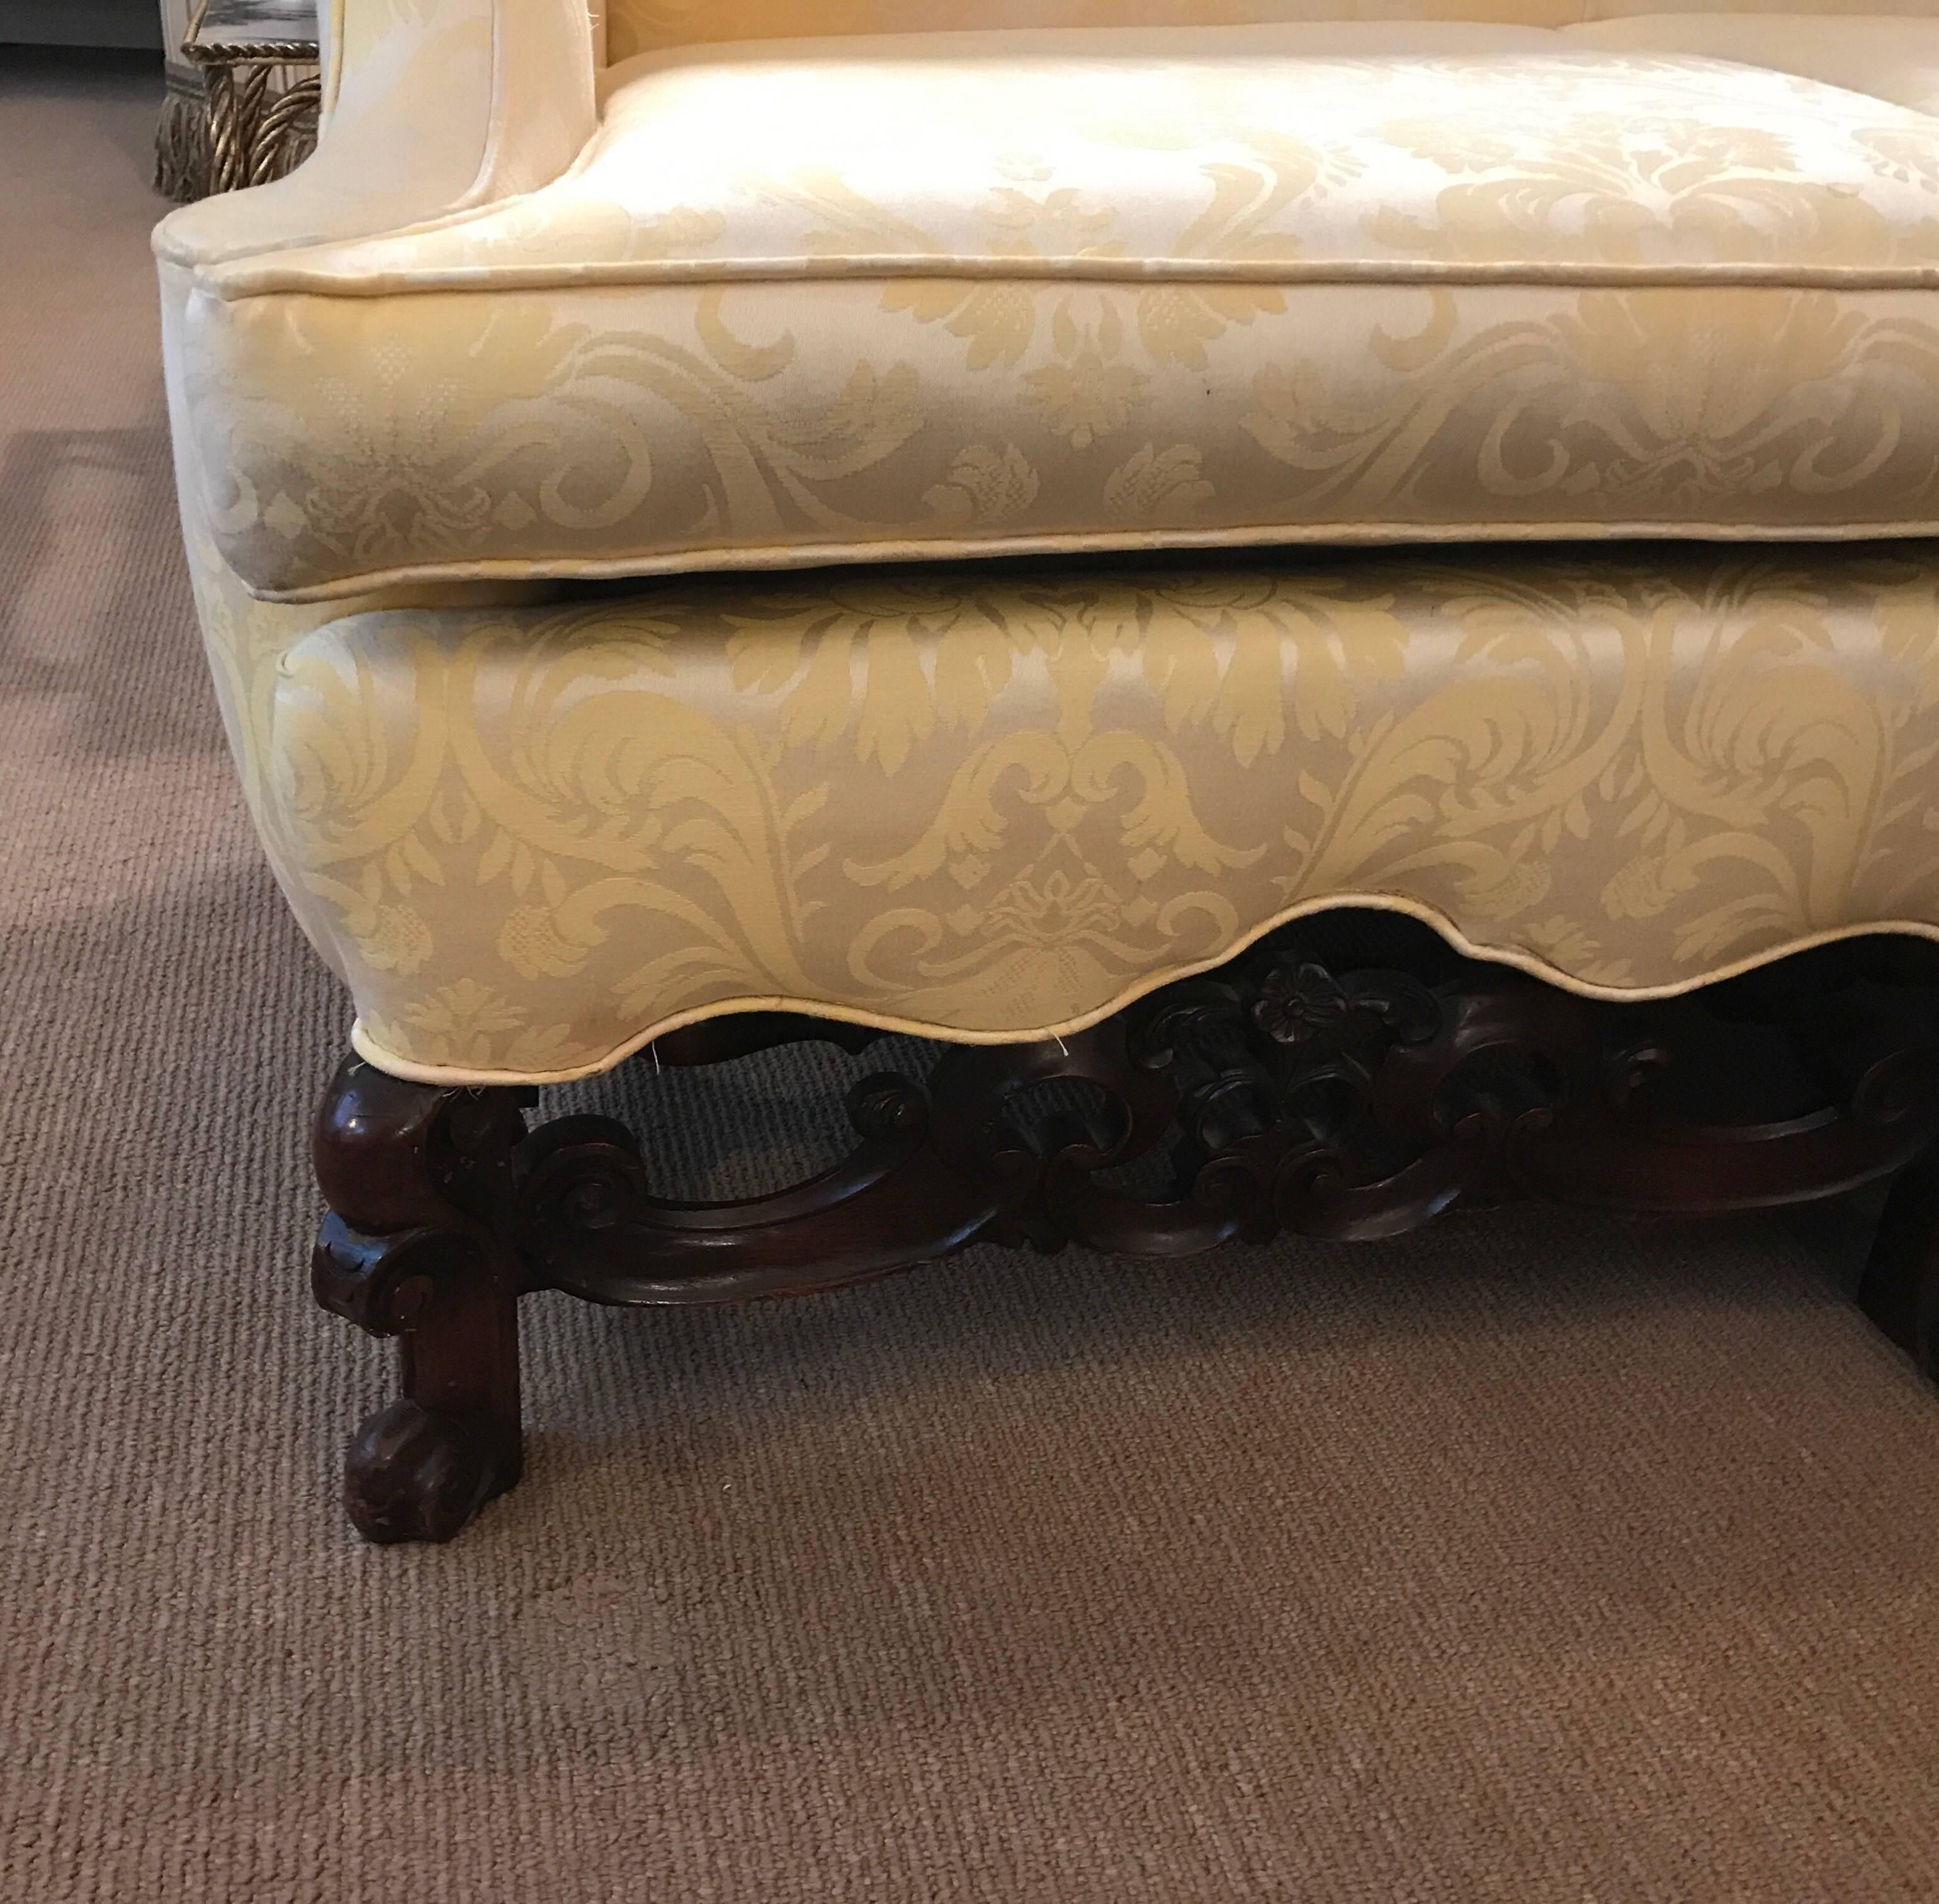 Stately antique tight back sofa with hand carved walnut base. The clean back with shapely arms and a scalloped apron resting on carved English Jacobean style legs with stretchers. This sofa is a great apartment size, 78 inches long. The springs are